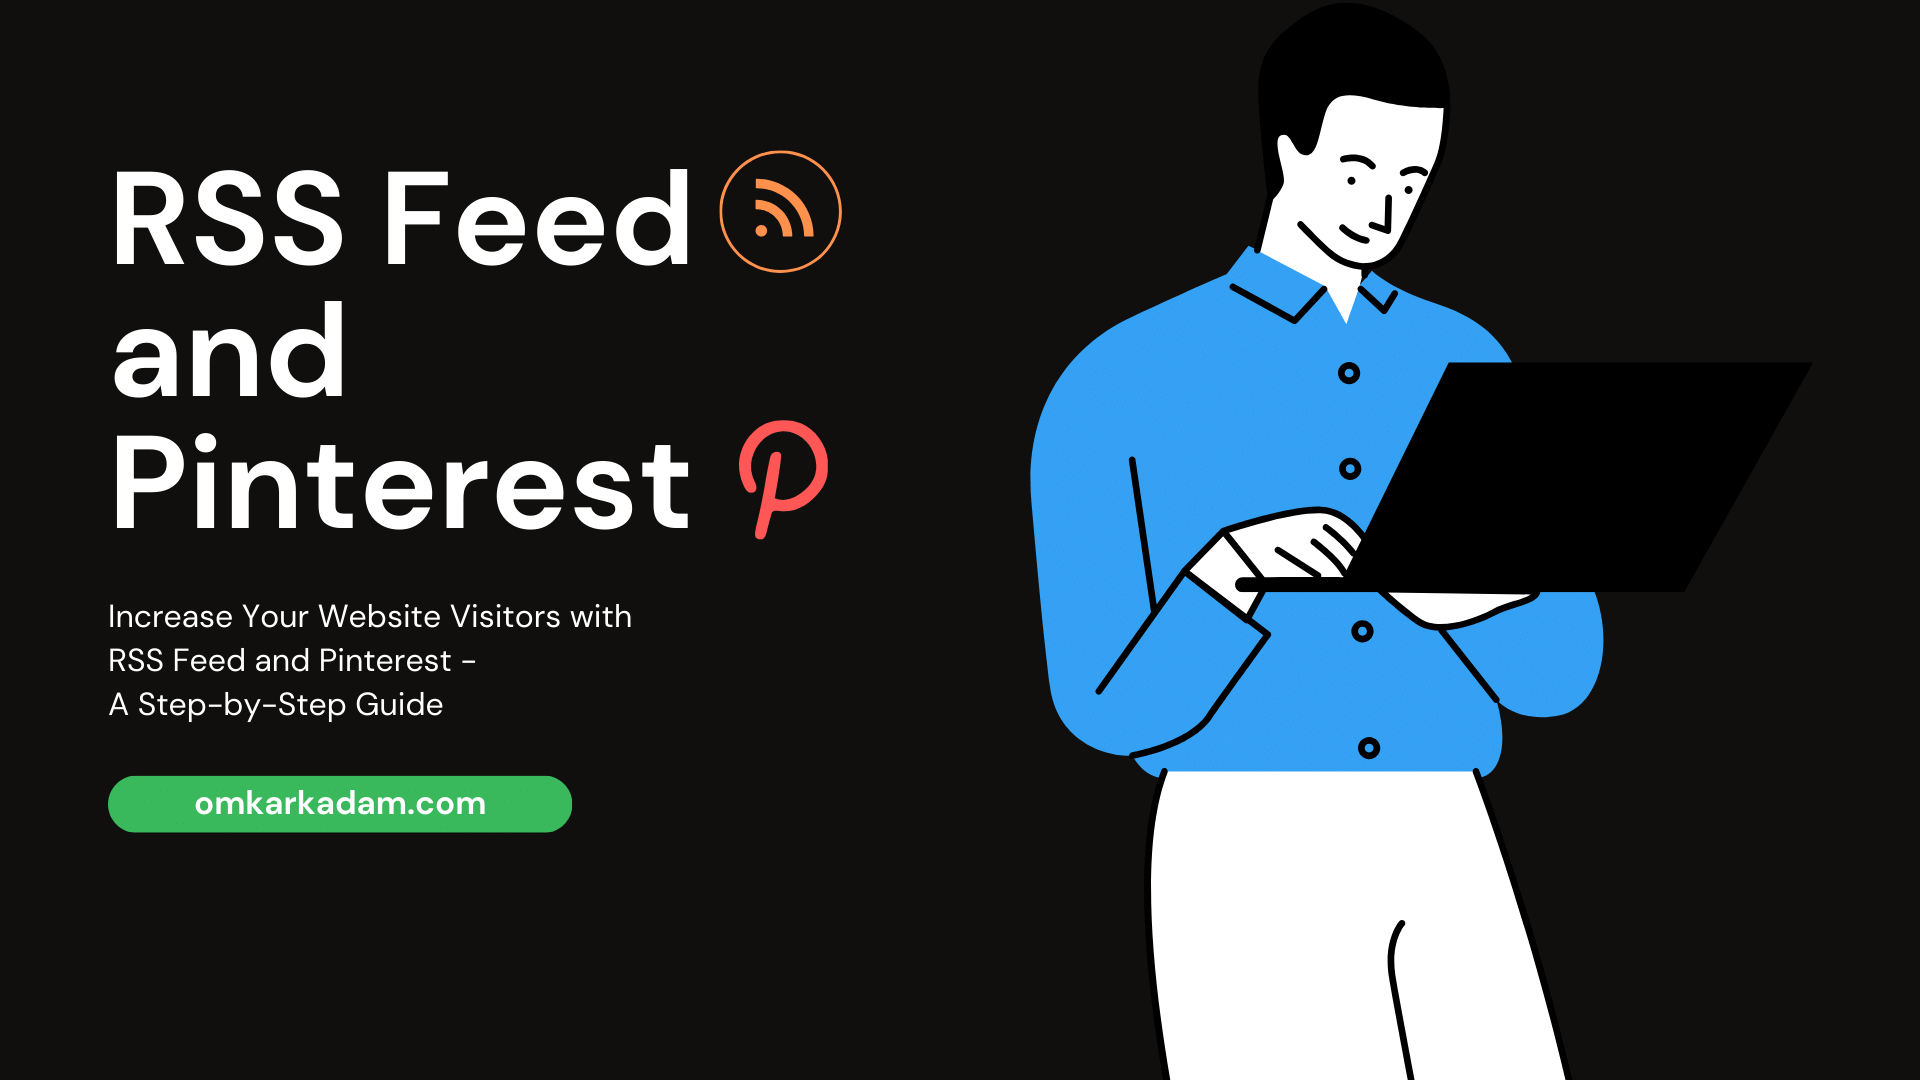 Increase Your Website Visitors with RSS Feed and Pinterest